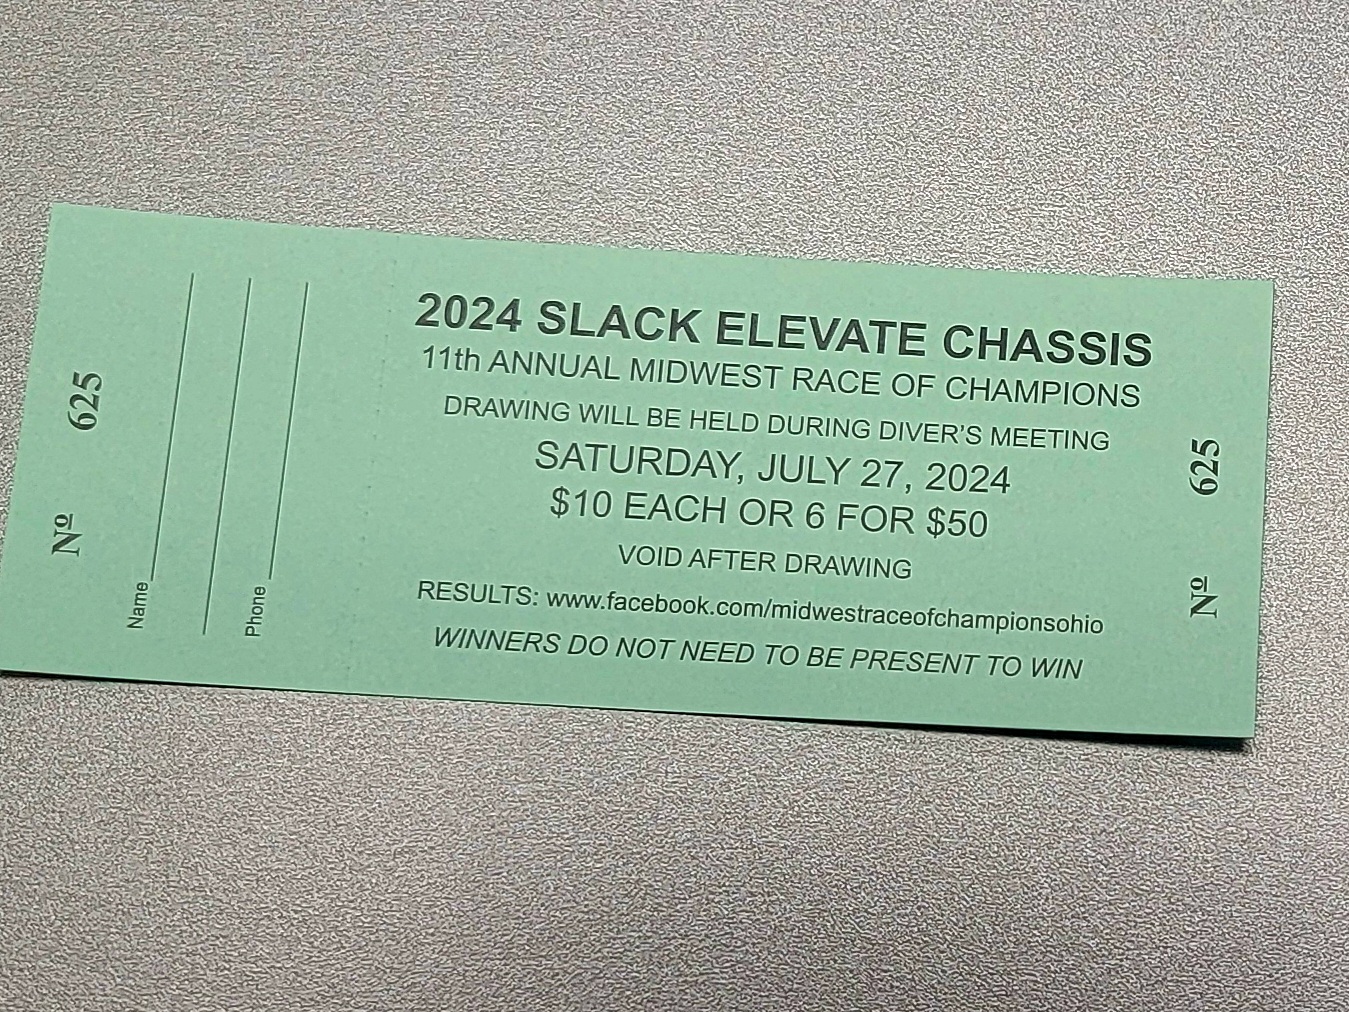 Midwest Race of Champions Ticket